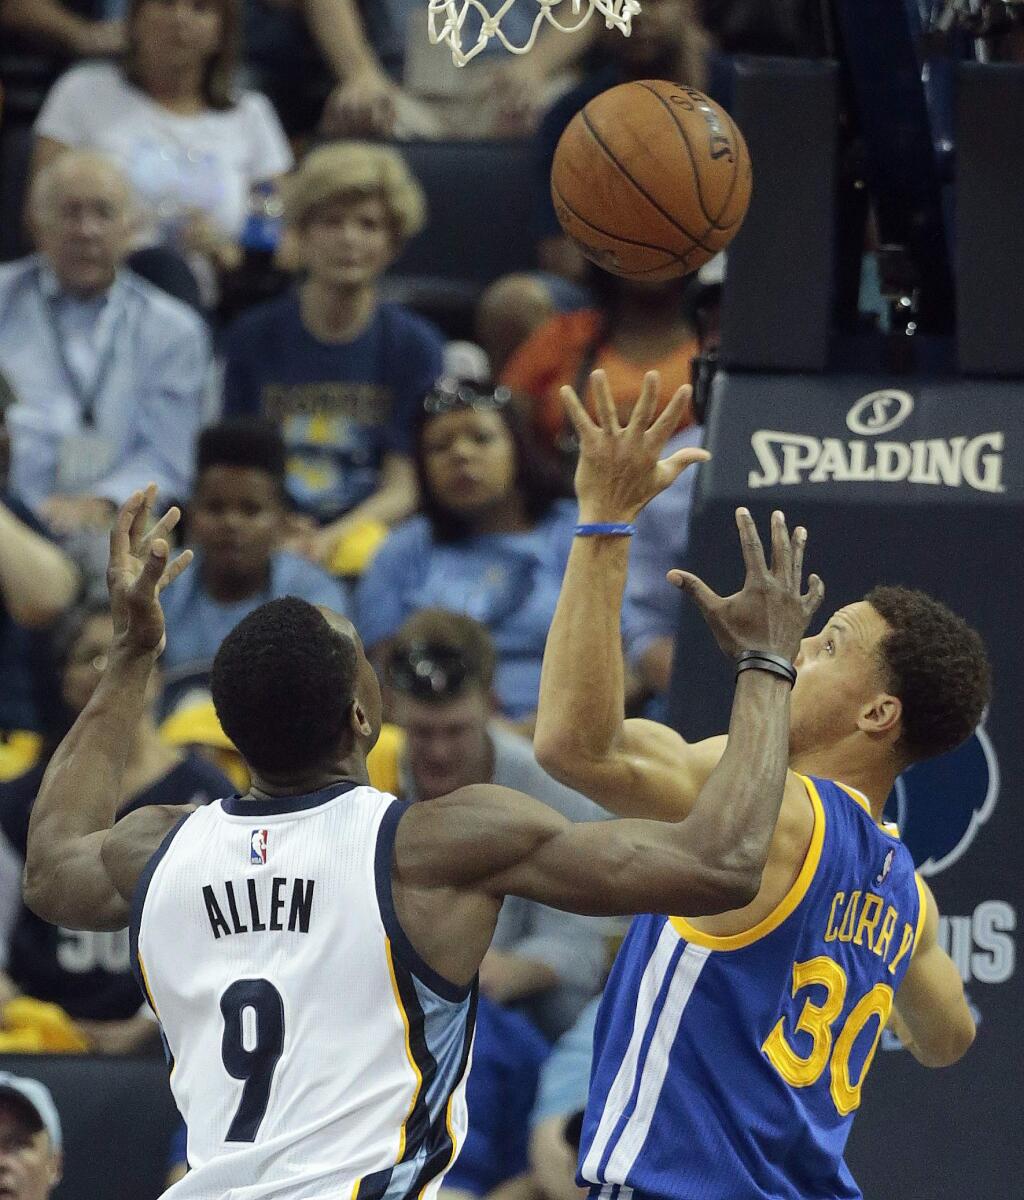 Golden State Warriors guard Stephen Curry (30) and Memphis Grizzlies forward Tony Allen (9) vie for a loose ball in the first half of Game 3 of a second-round NBA basketball Western Conference playoff series Saturday, May 9, 2015, in Memphis, Tenn. (AP Photo/Mark Humphrey)